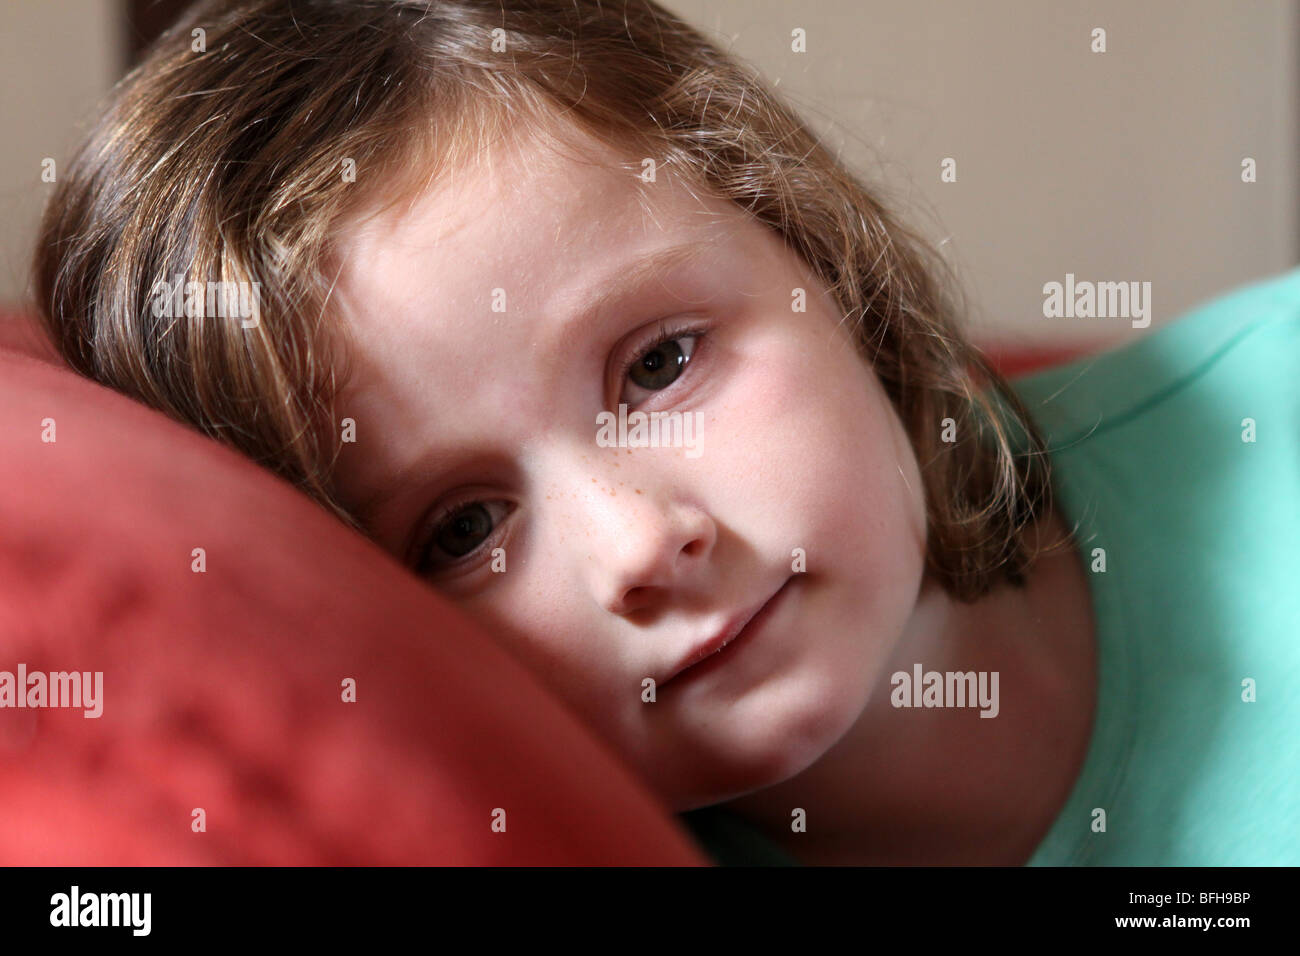 female child lying on red sofa looking towards camera with serious thoughtful pose Stock Photo